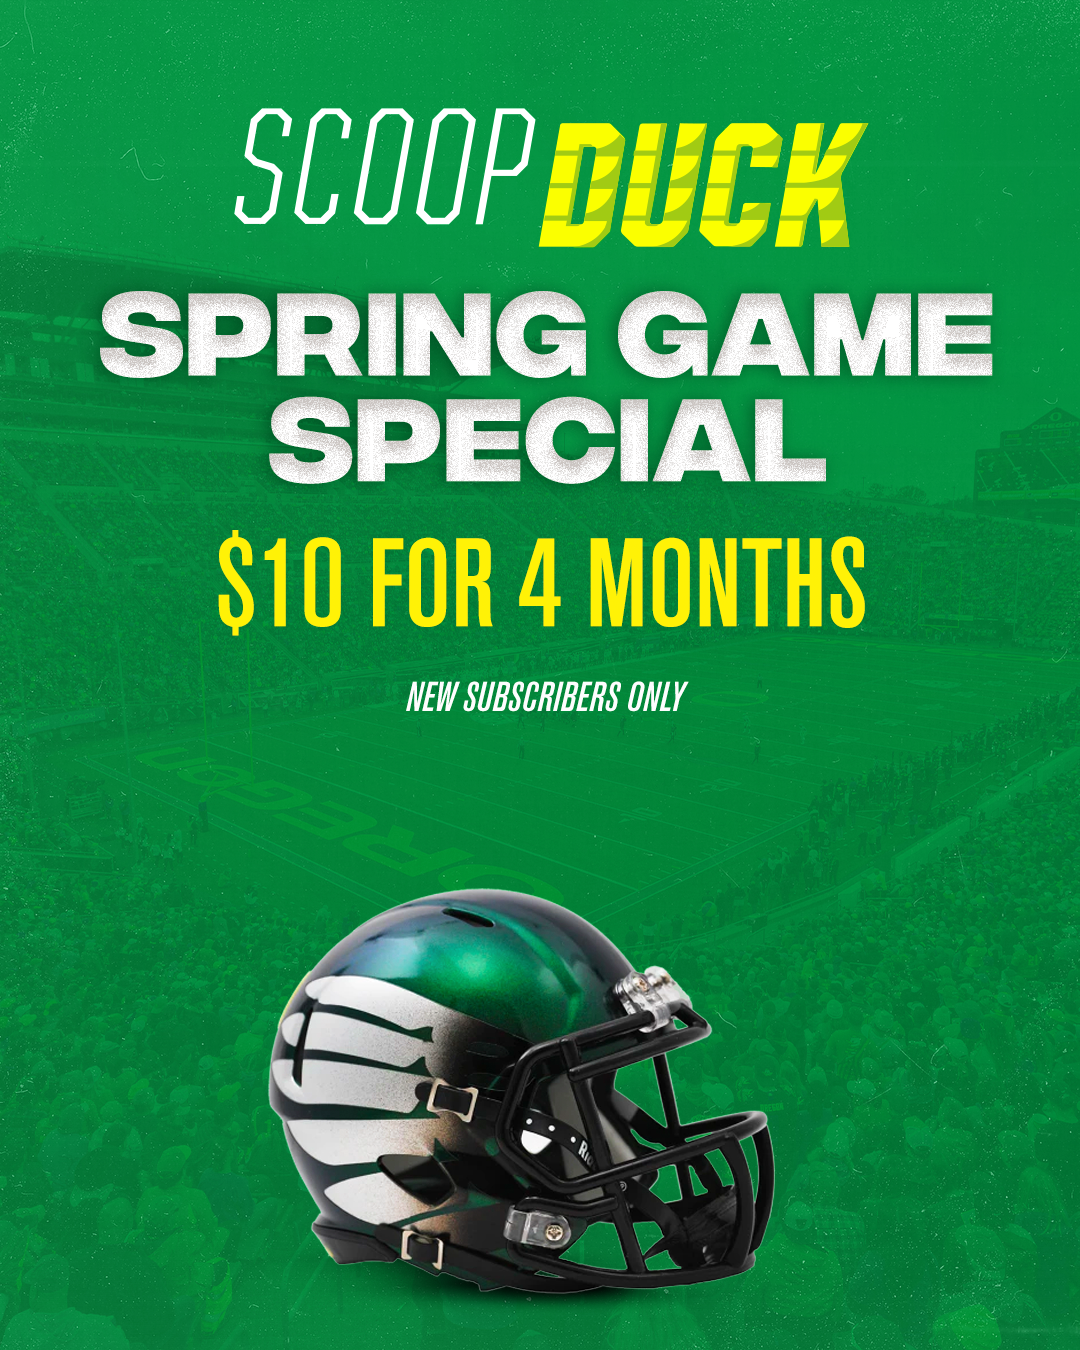 ACT NOW: Oregon Spring Game Special